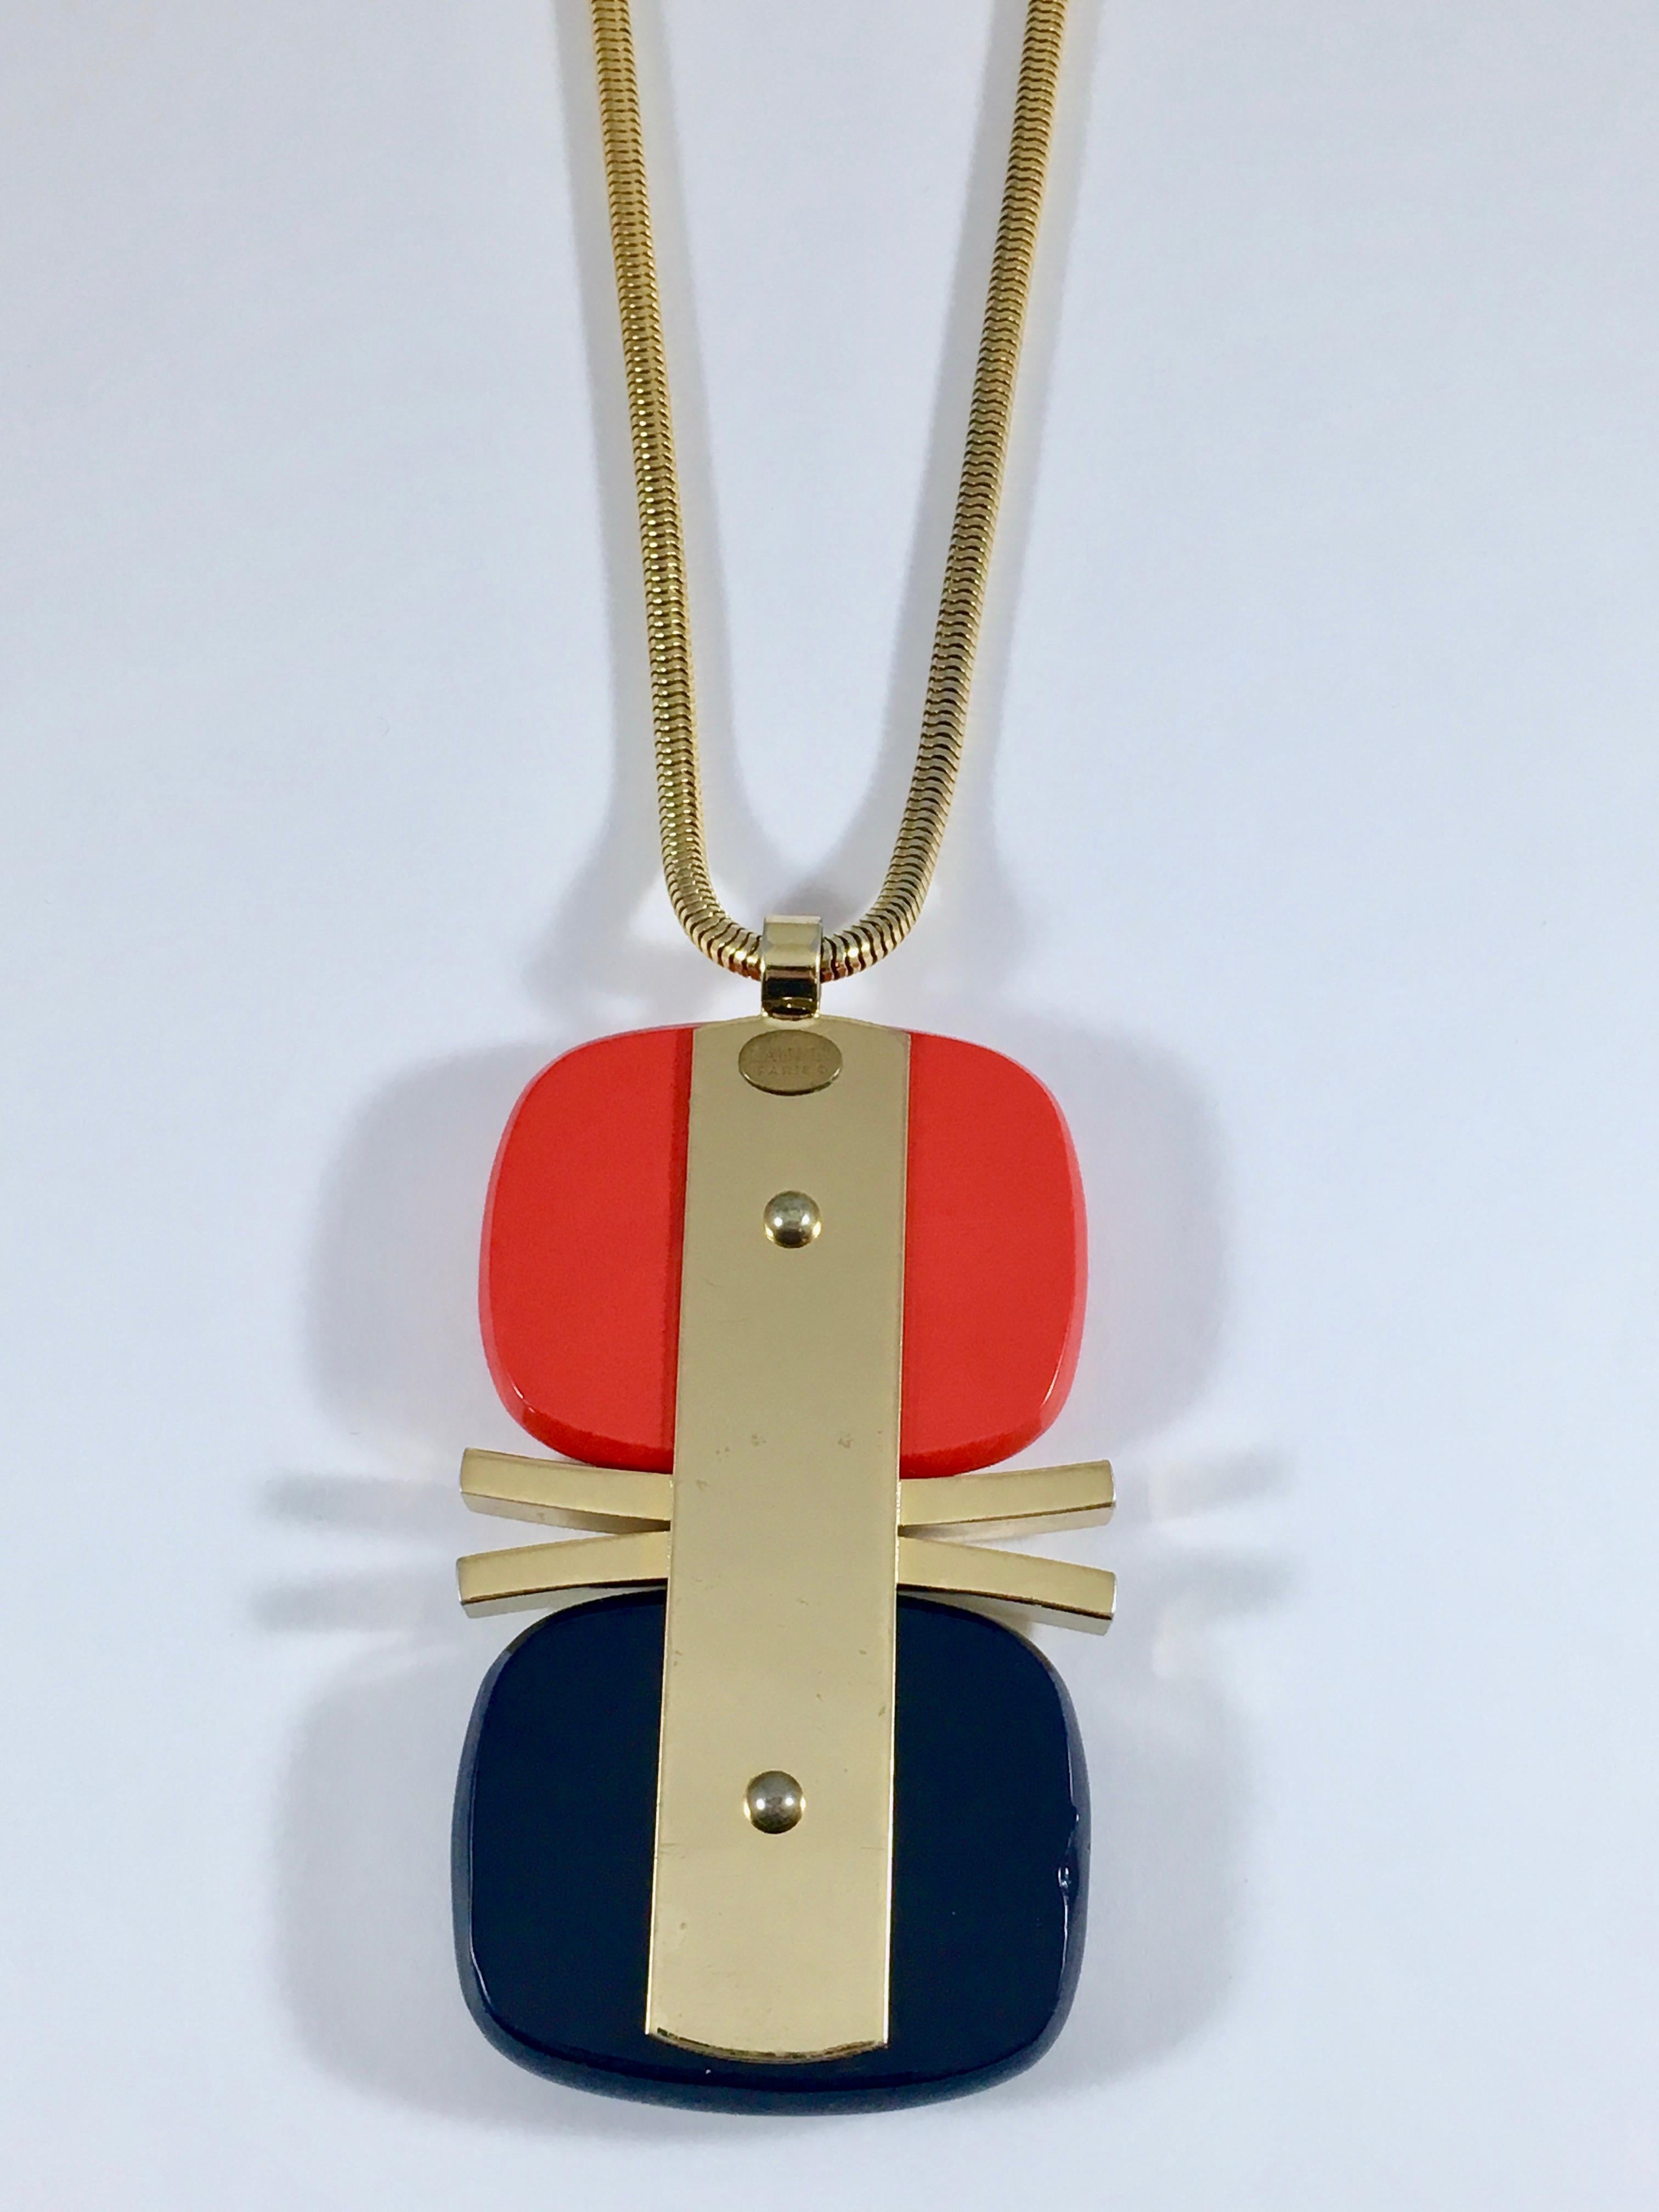 Lanvin Red and Navy Modernist Pendant Necklace, 1970s For Sale 2